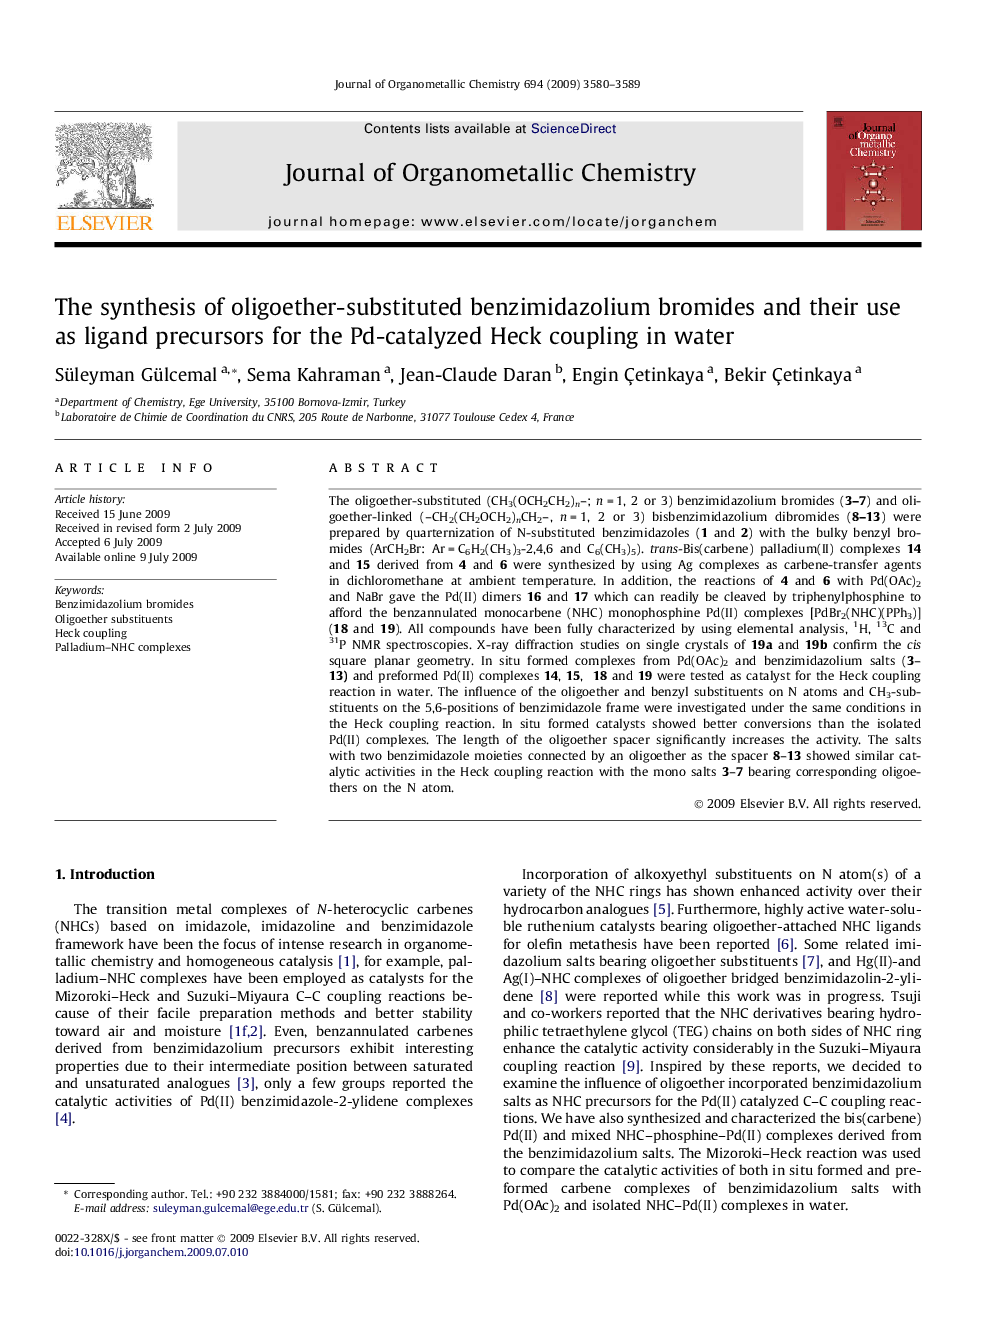 The synthesis of oligoether-substituted benzimidazolium bromides and their use as ligand precursors for the Pd-catalyzed Heck coupling in water